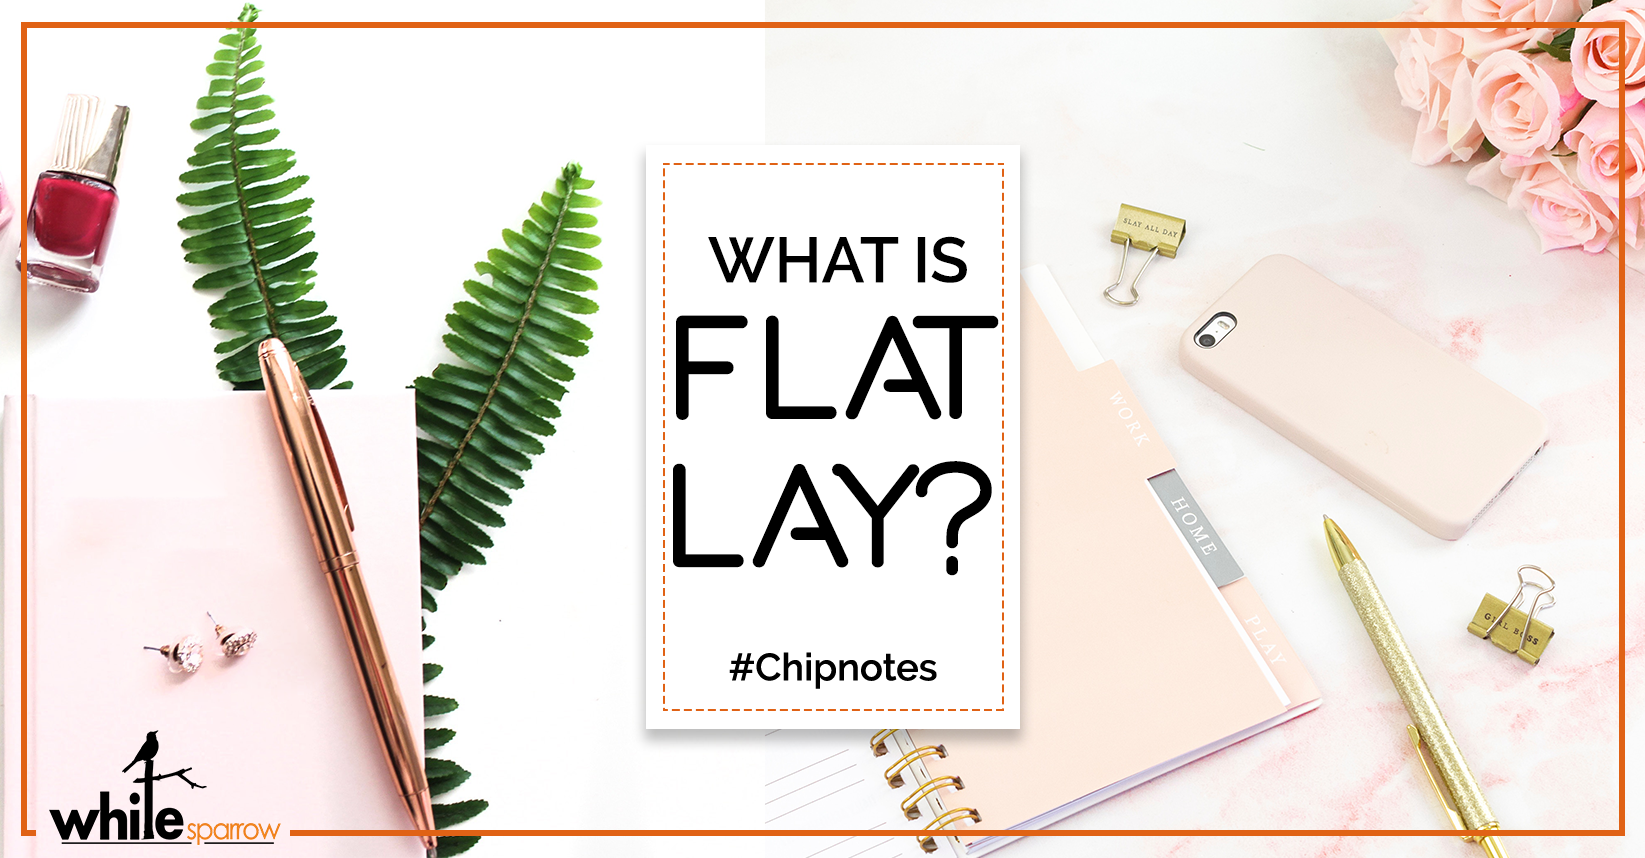 What is flat lay?